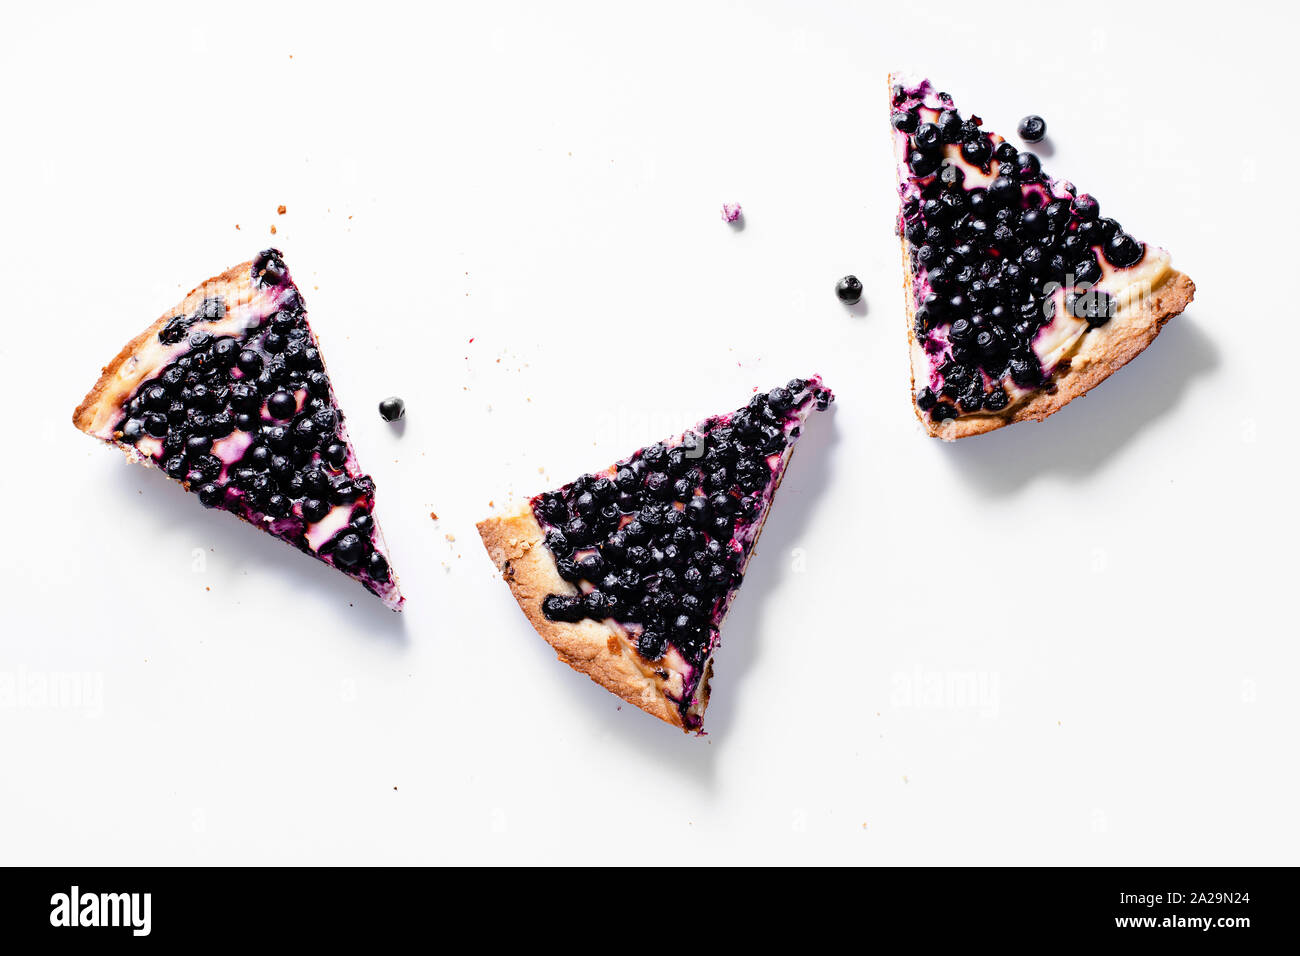 Pieces of summer tart with fresh blueberries Stock Photo